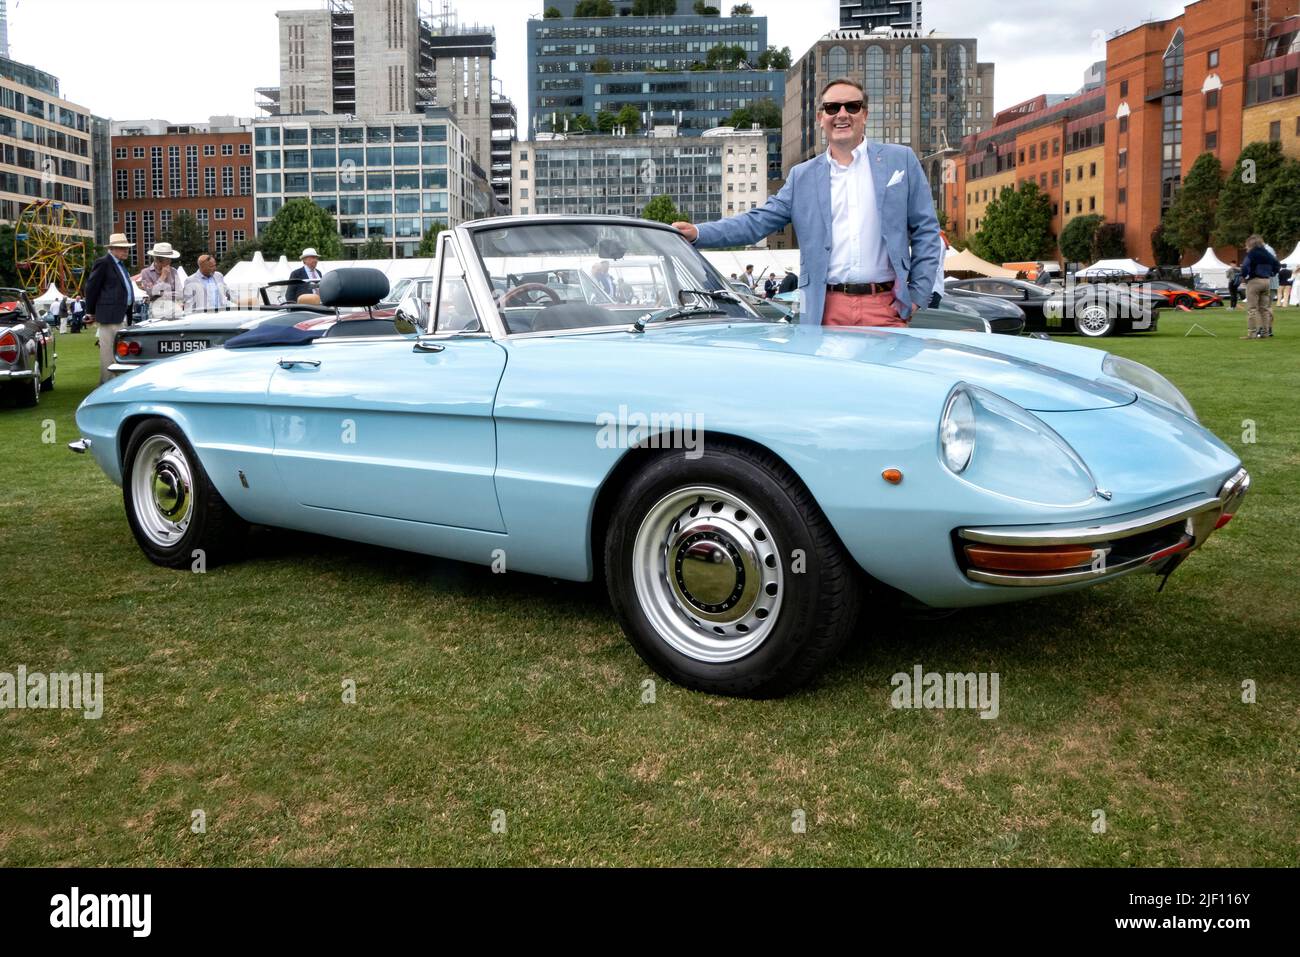 1969 Alfa Romeo Duetto Spider beim London Concours bei der Honourable Artillery Company in der City of London UK Stockfoto